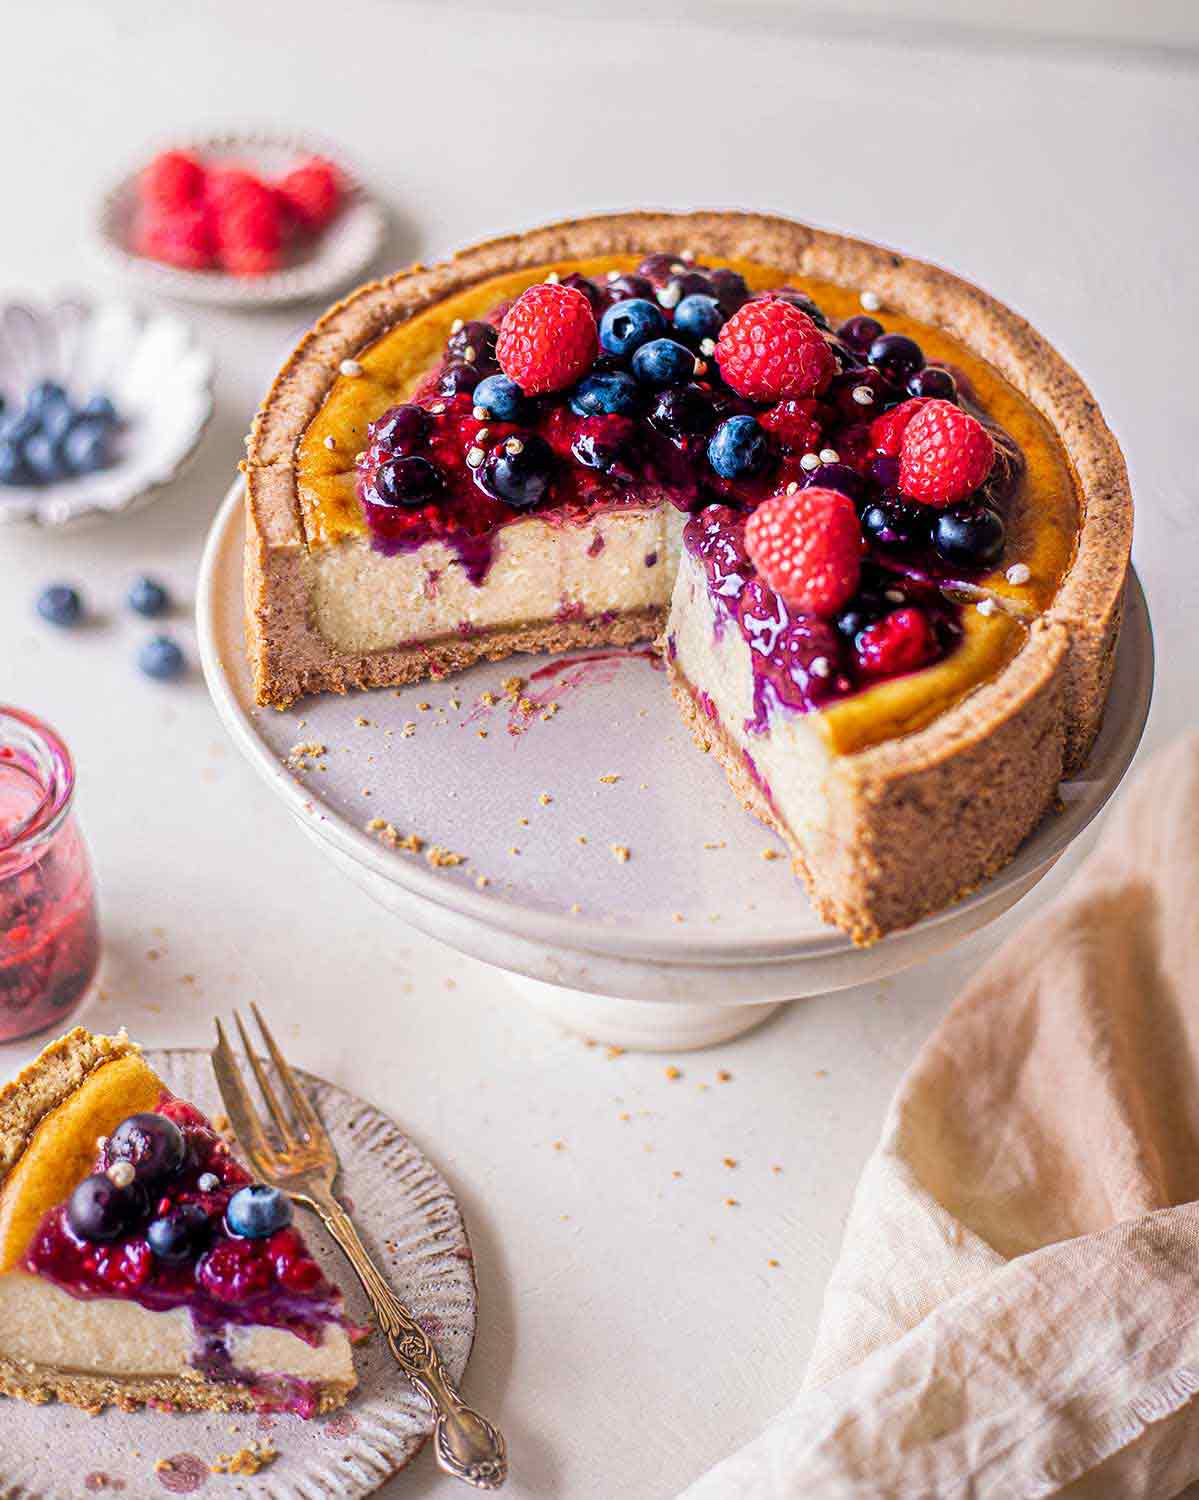 Cheesecake topped with berries on cake stand with a few slices taken out so you can see the creamy texture. Cake slice is in foreground.